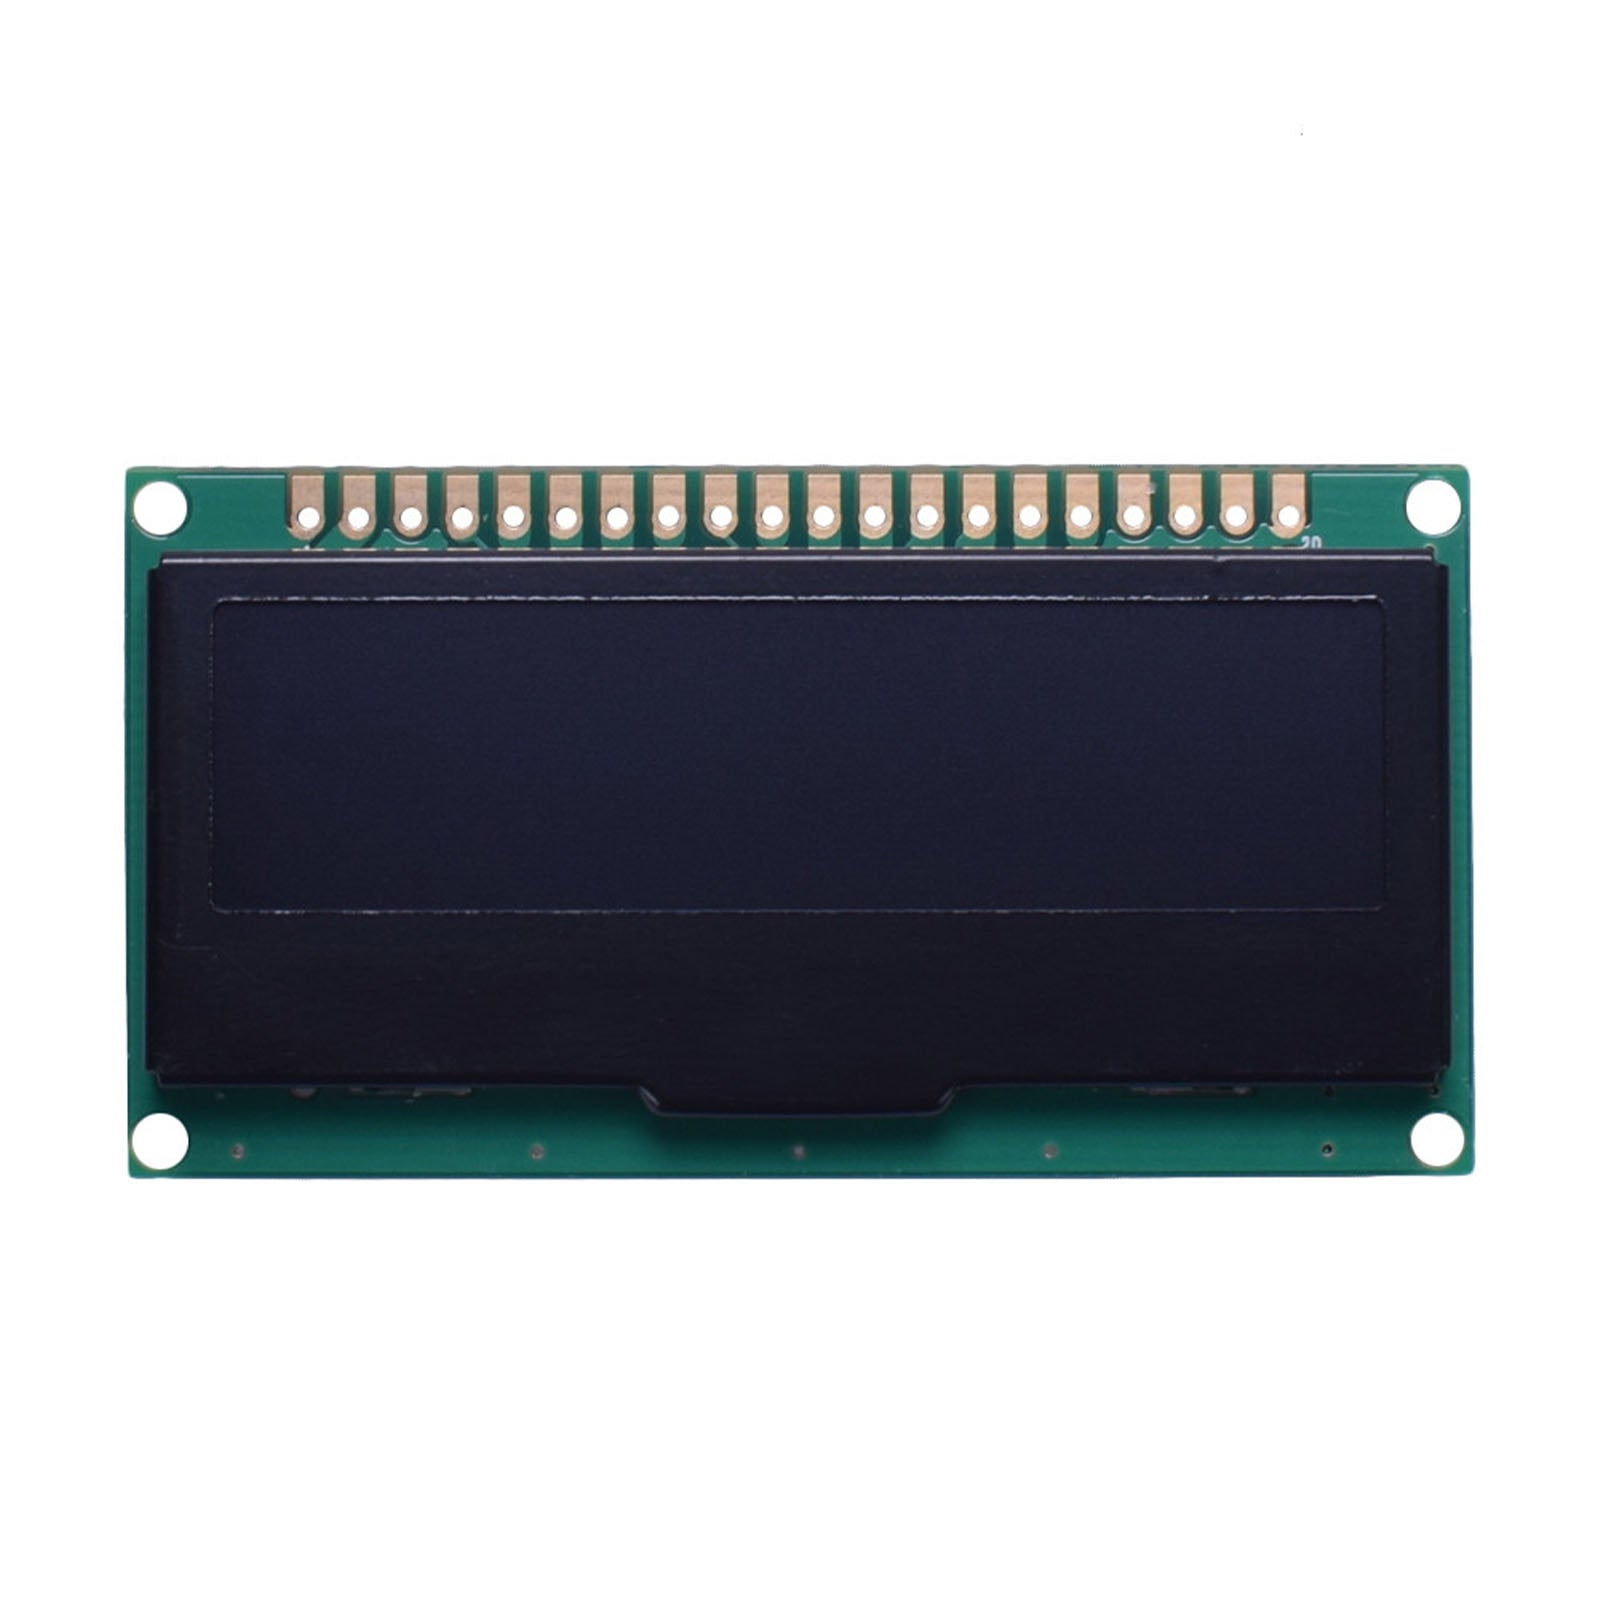 Blue 128x32 OLED Display Module with MCU, SPI, and I2C Compatibility